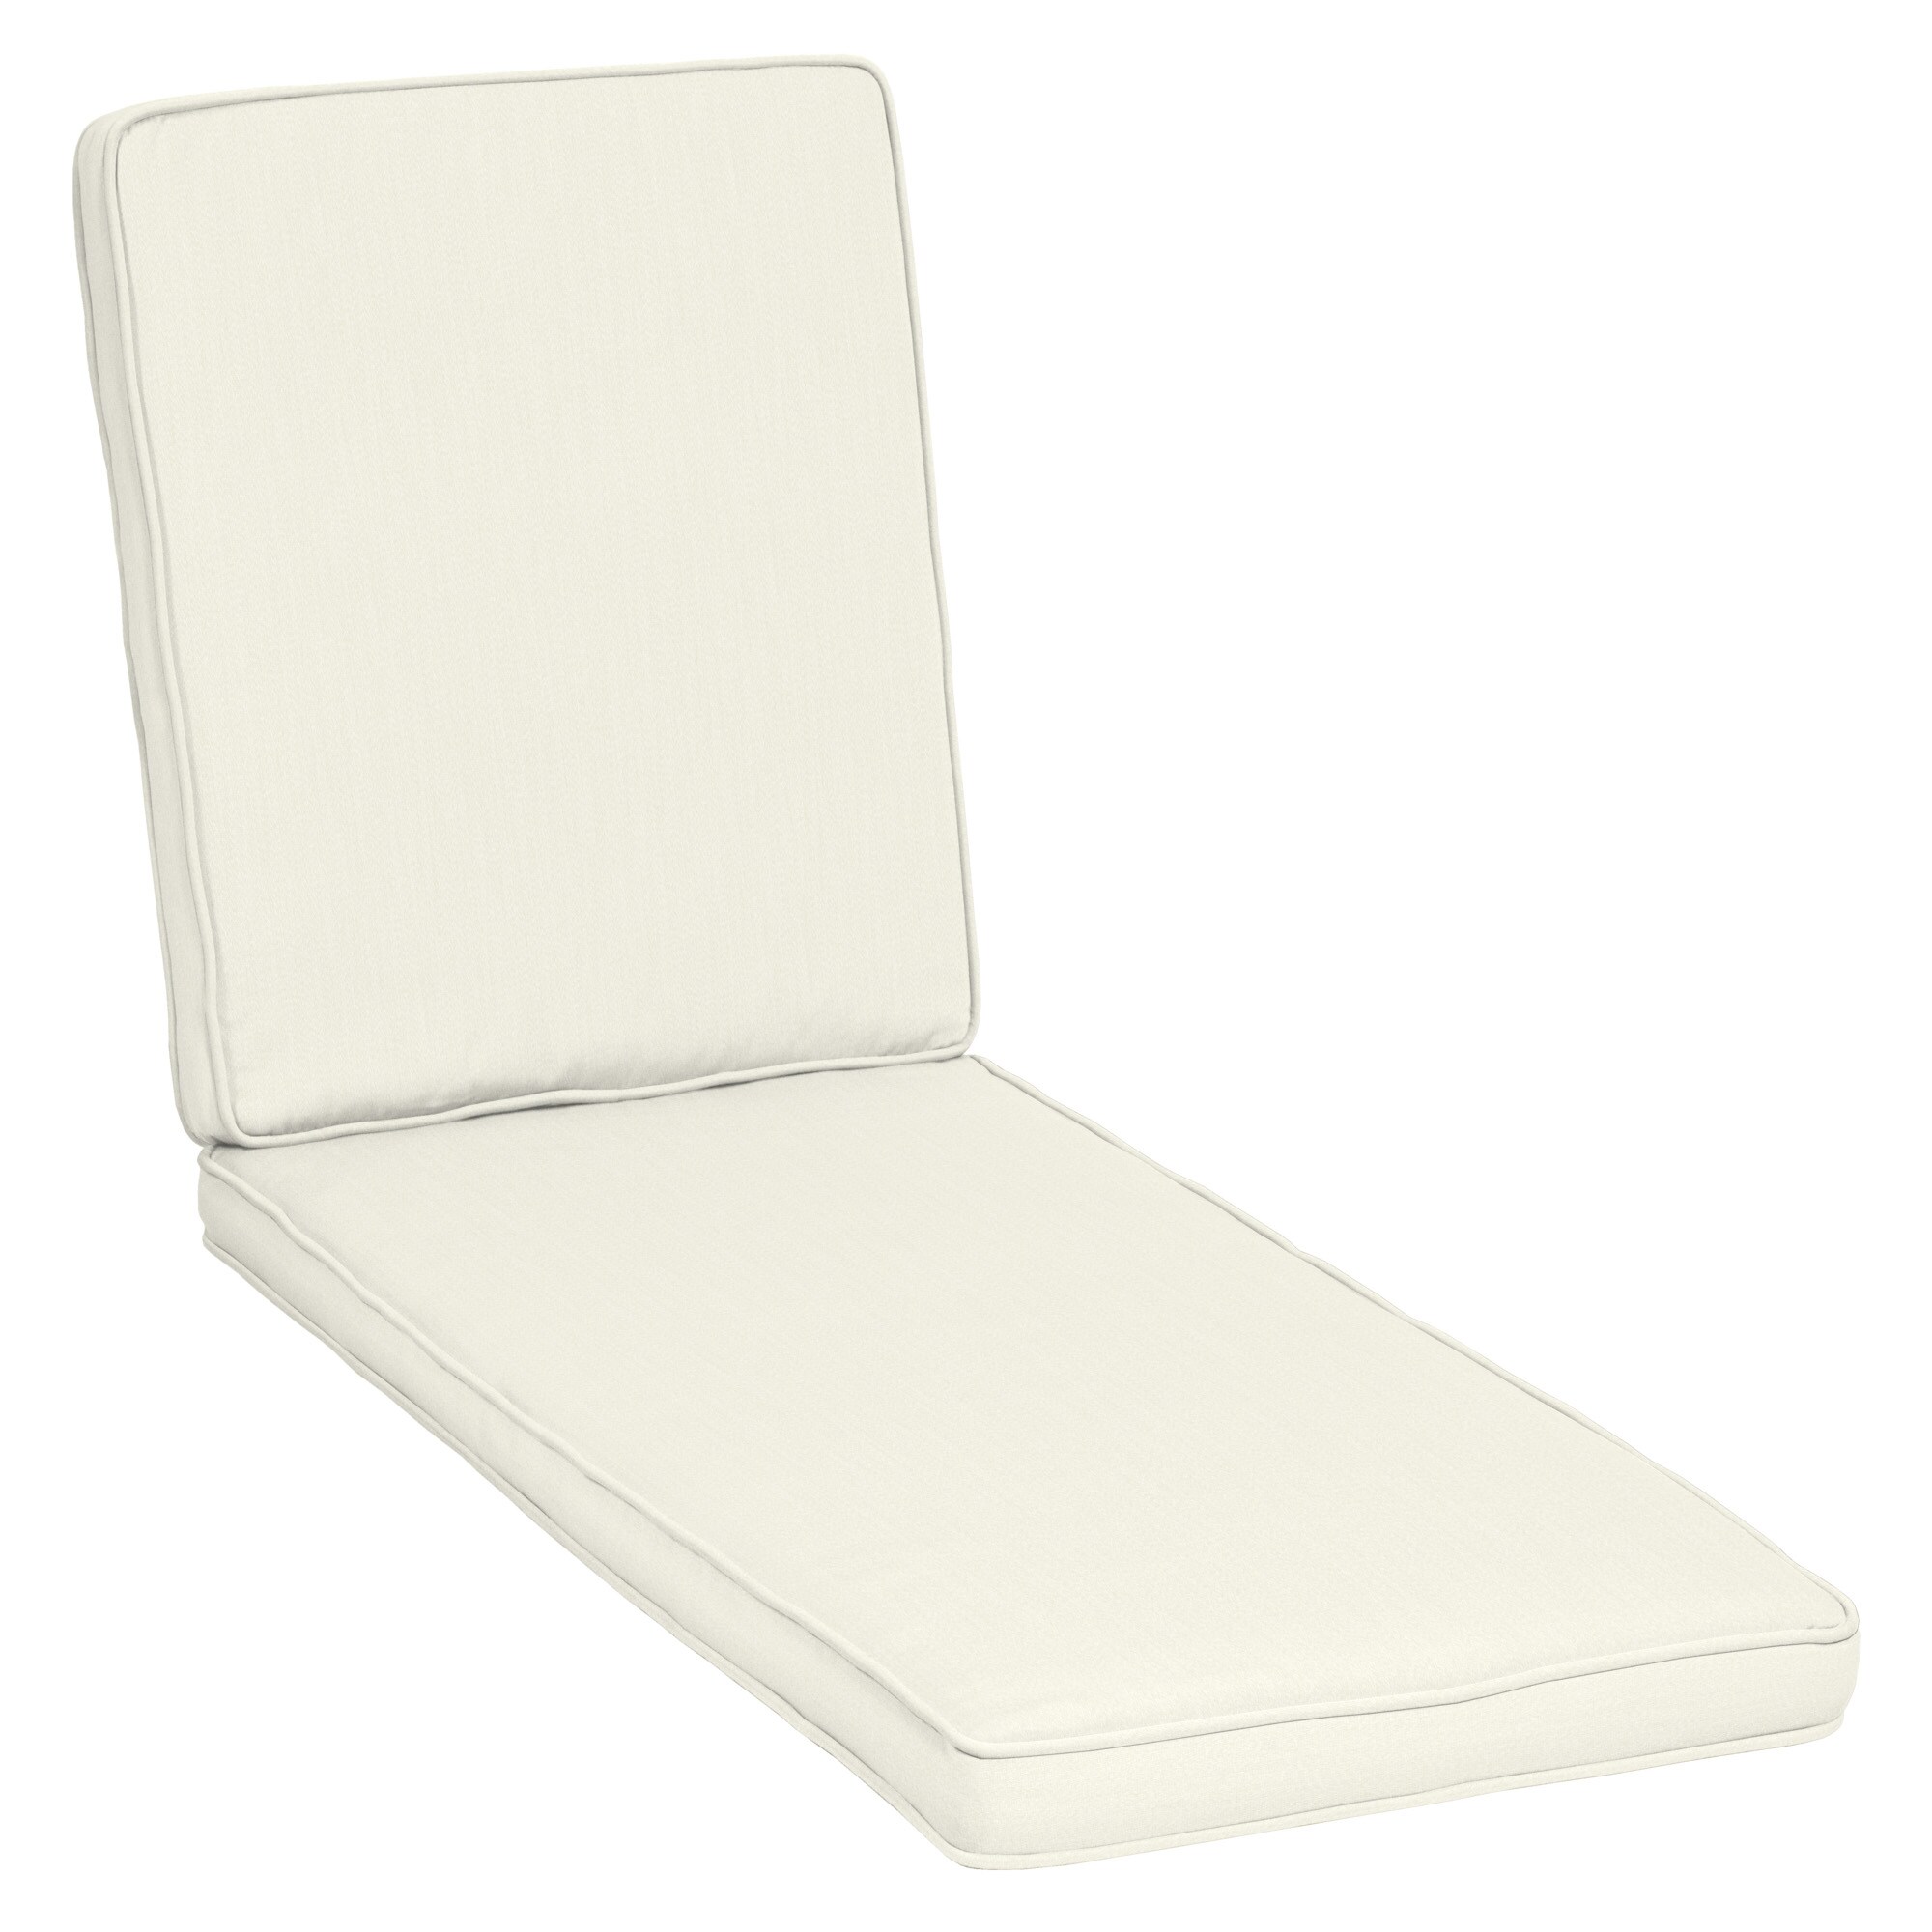 Arden Selections Oasis 30 x 26 in. Firm Deep Seat Cushion Set - Cloud White  